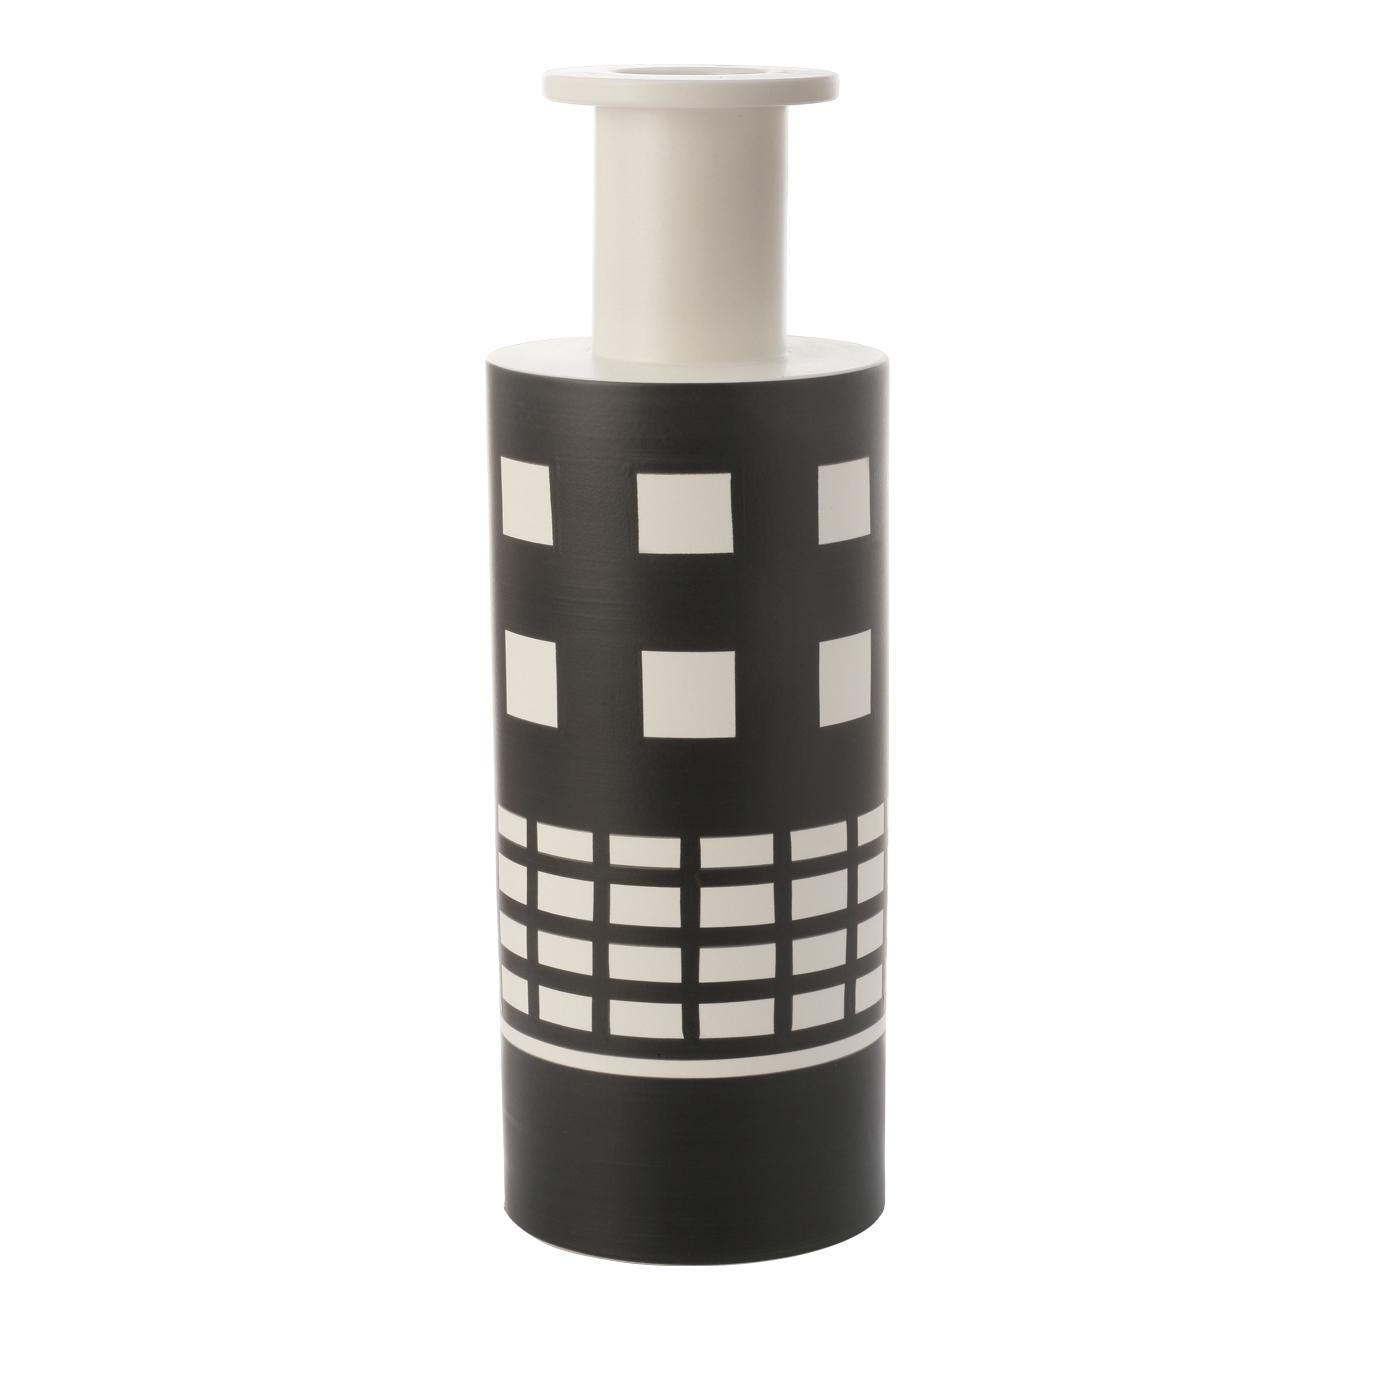 Italian Black and White Reel Vase by Ettore Sottsass For Sale